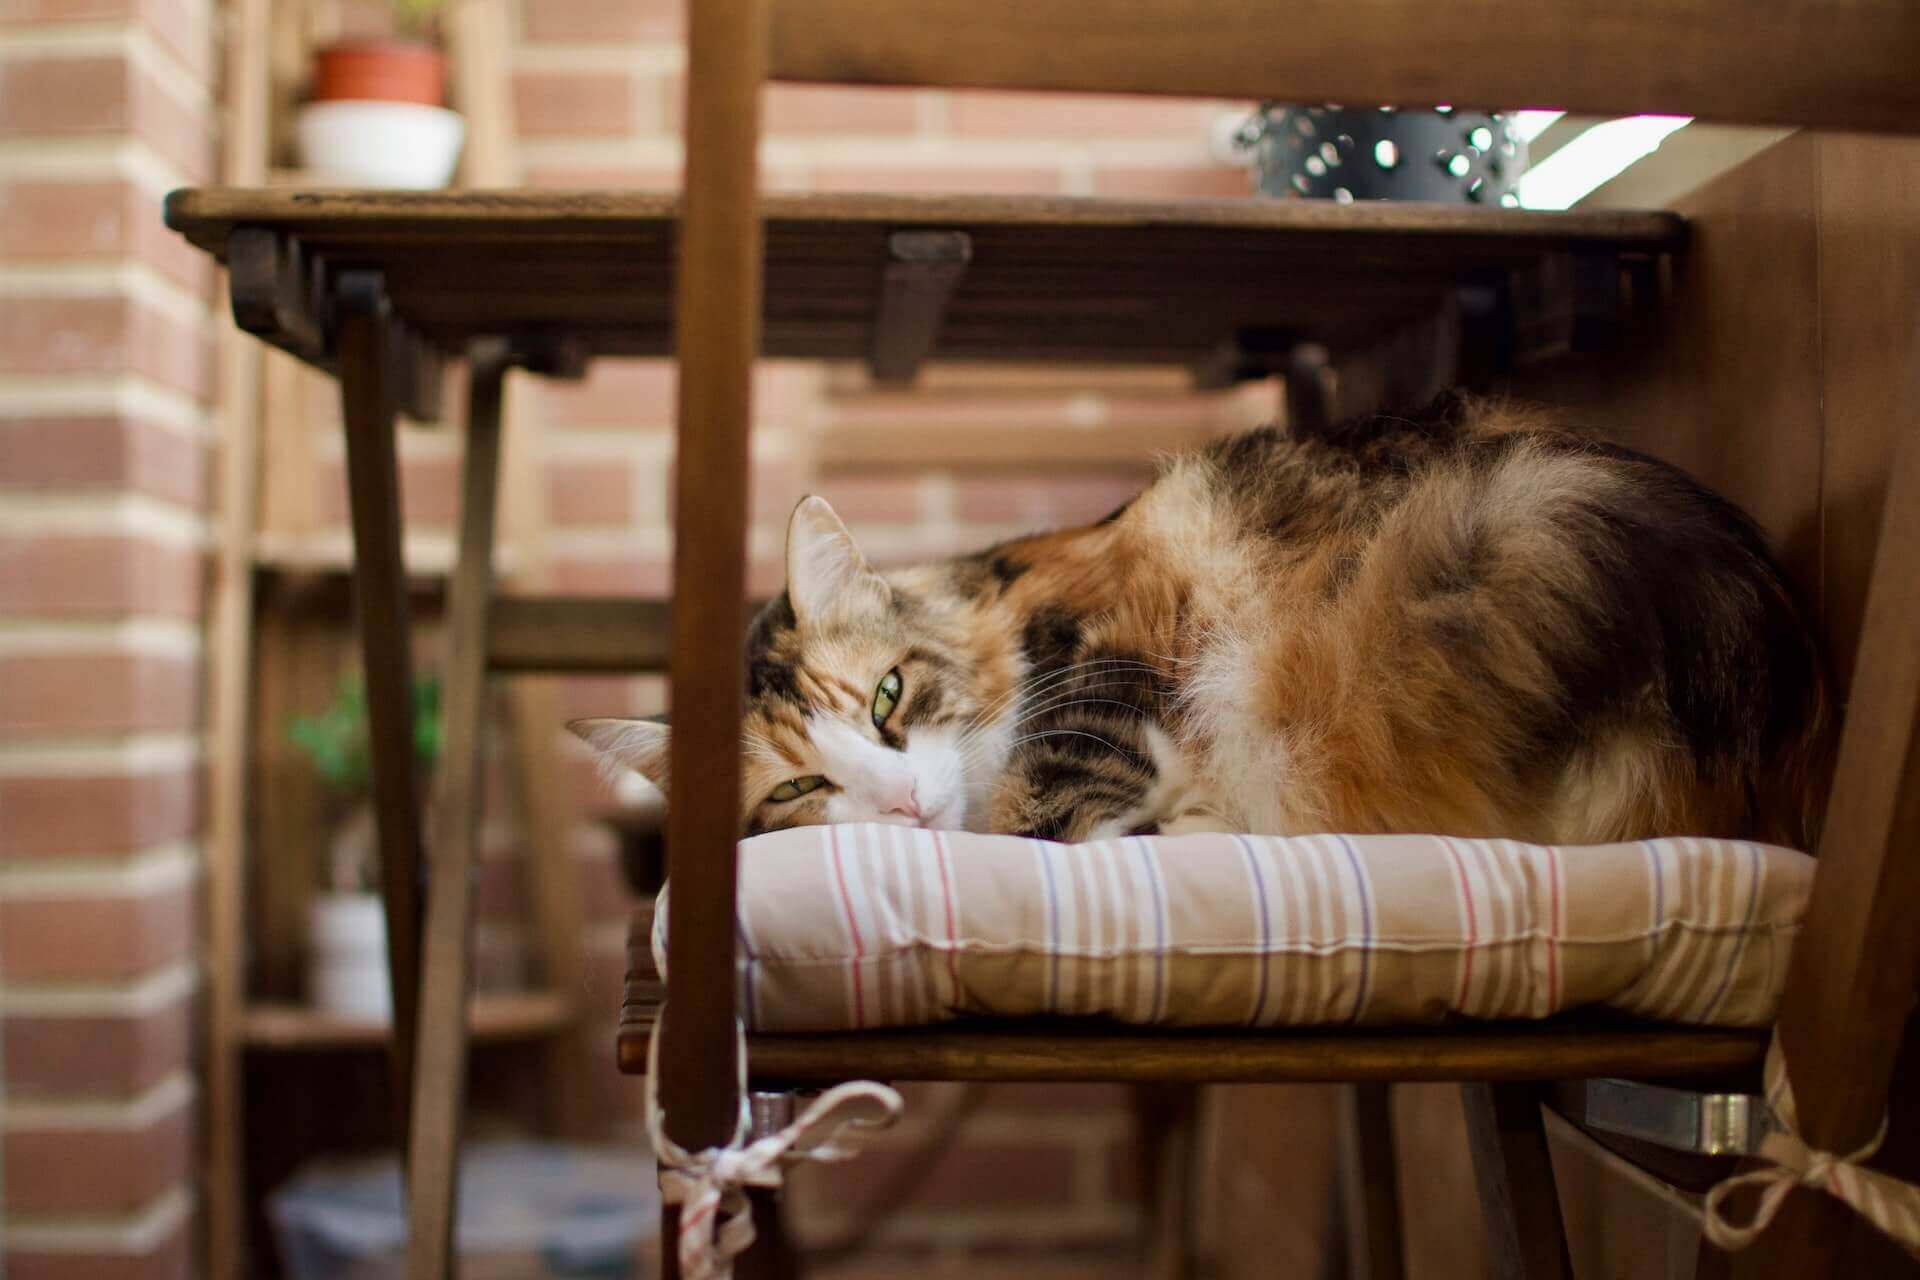 A cat relaxes on a chair by a window.